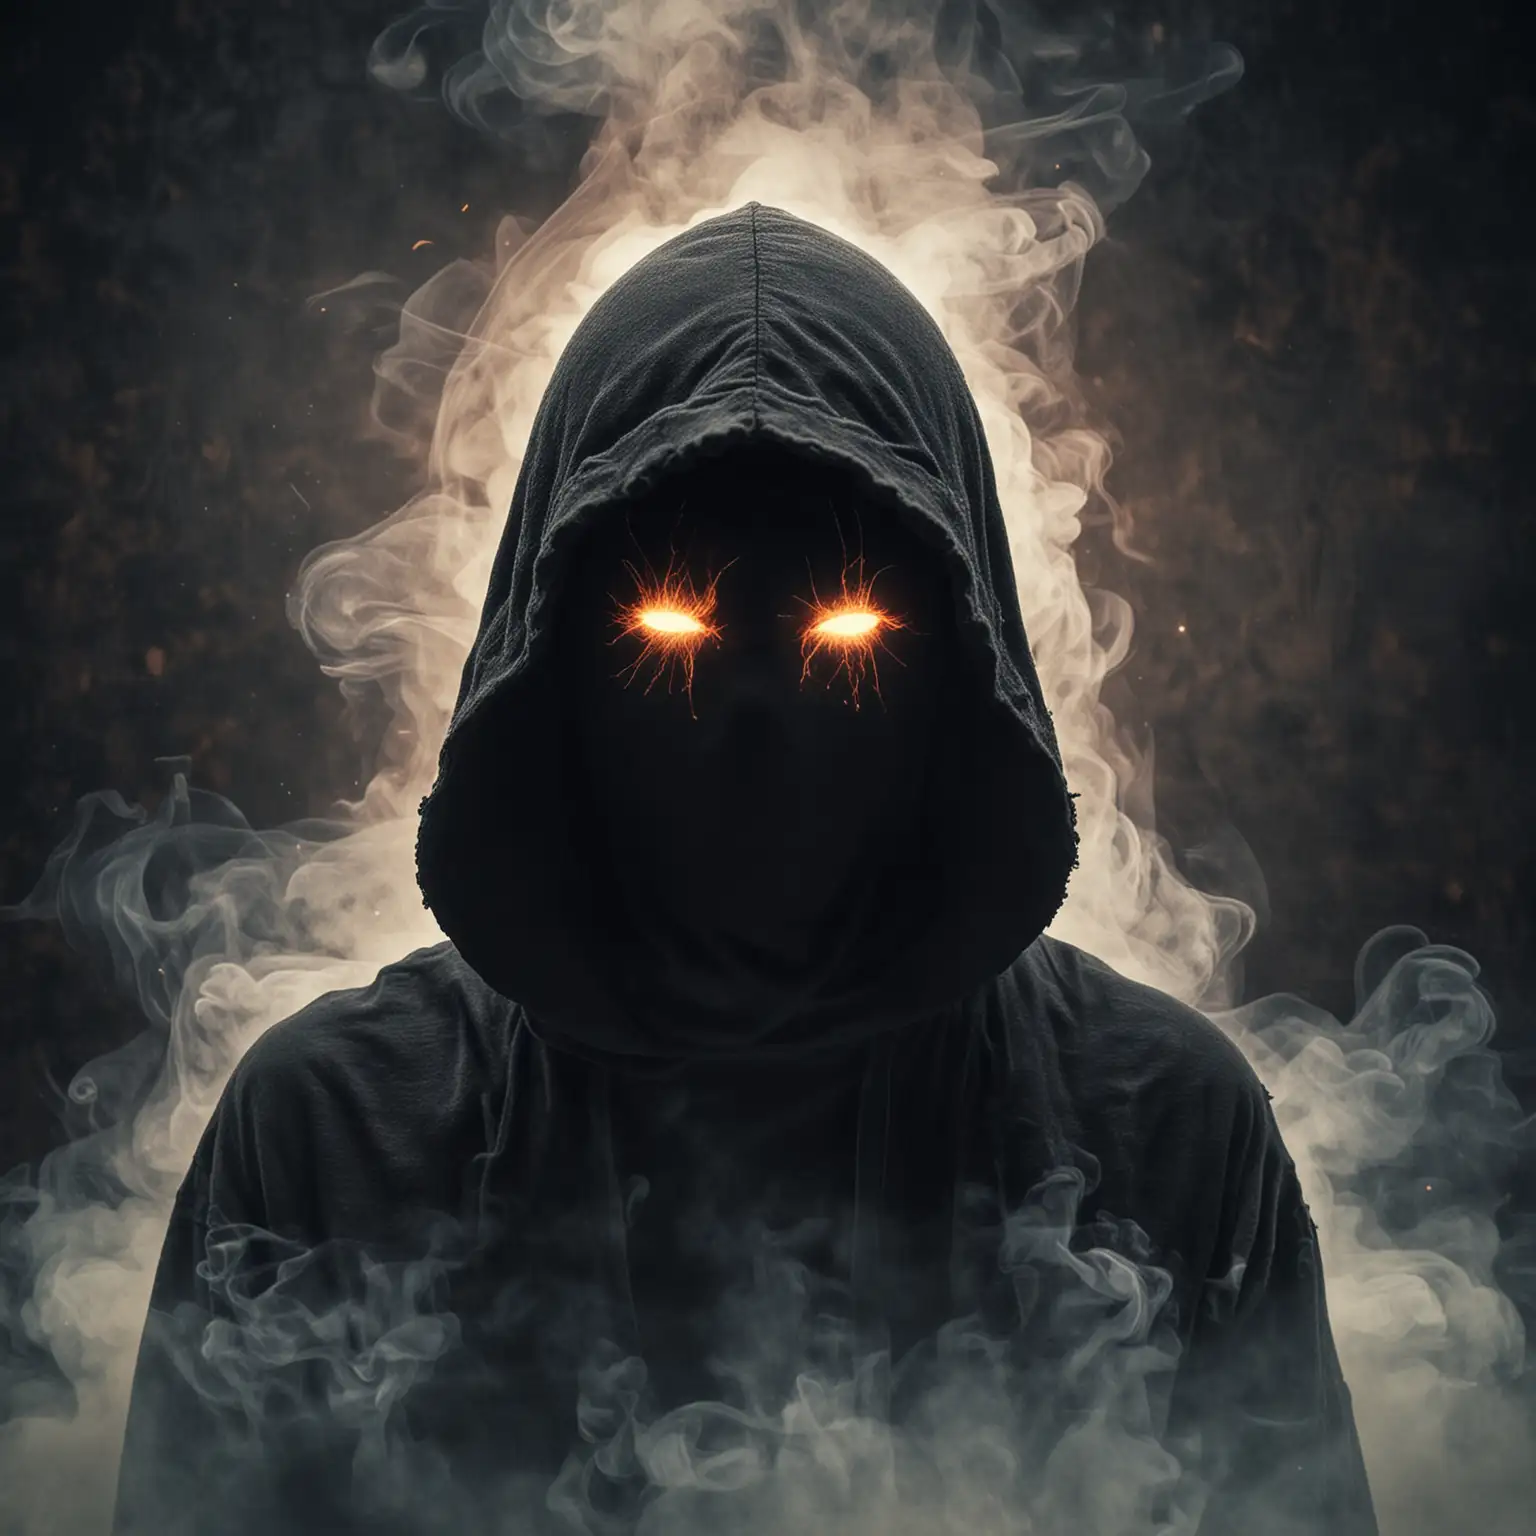 Hooded Figure with Glowing Eyes in Mysterious Smoky Atmosphere